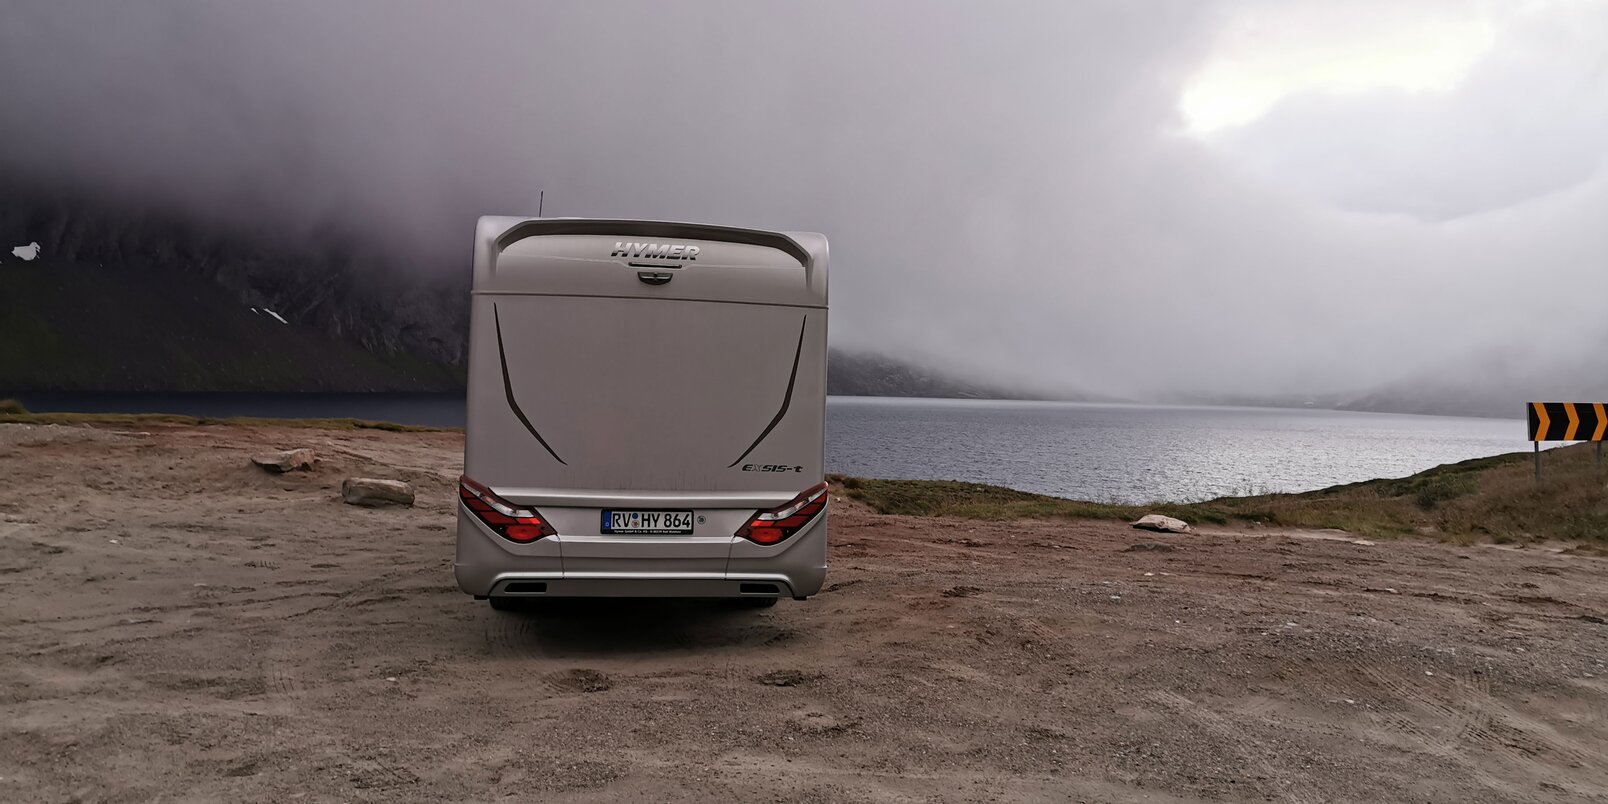 HYMER Exsis-t motorhome from behind on the gravelly shore in a cloud-covered fjord